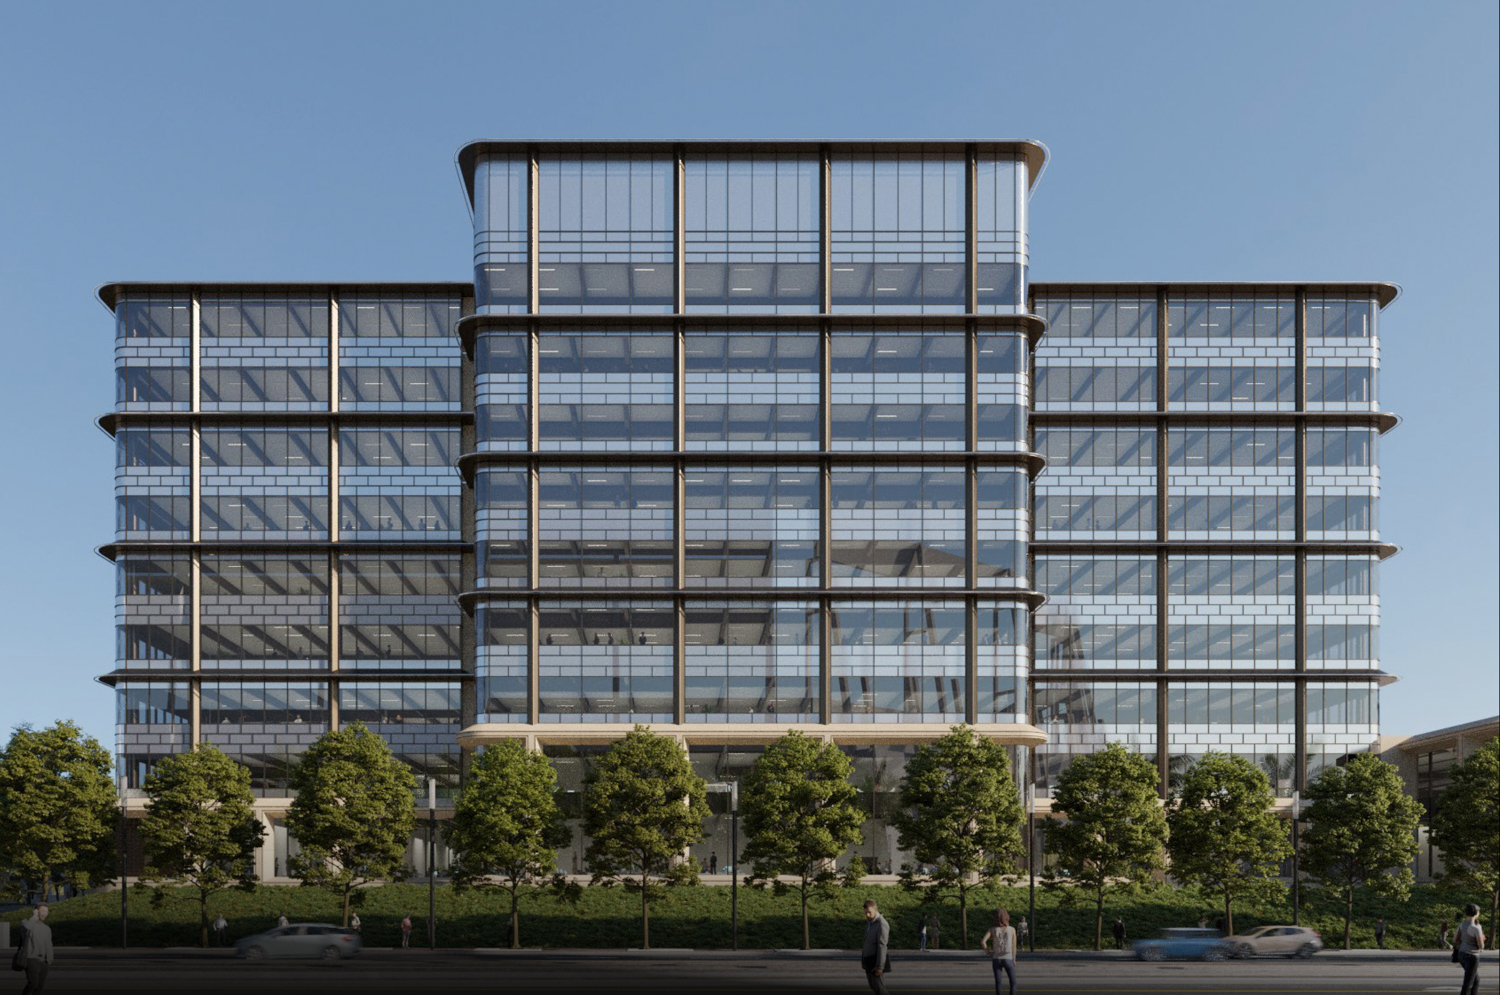 Related Santa Clara Block 5A office building, rendering via Gensler design by Foster and Partners